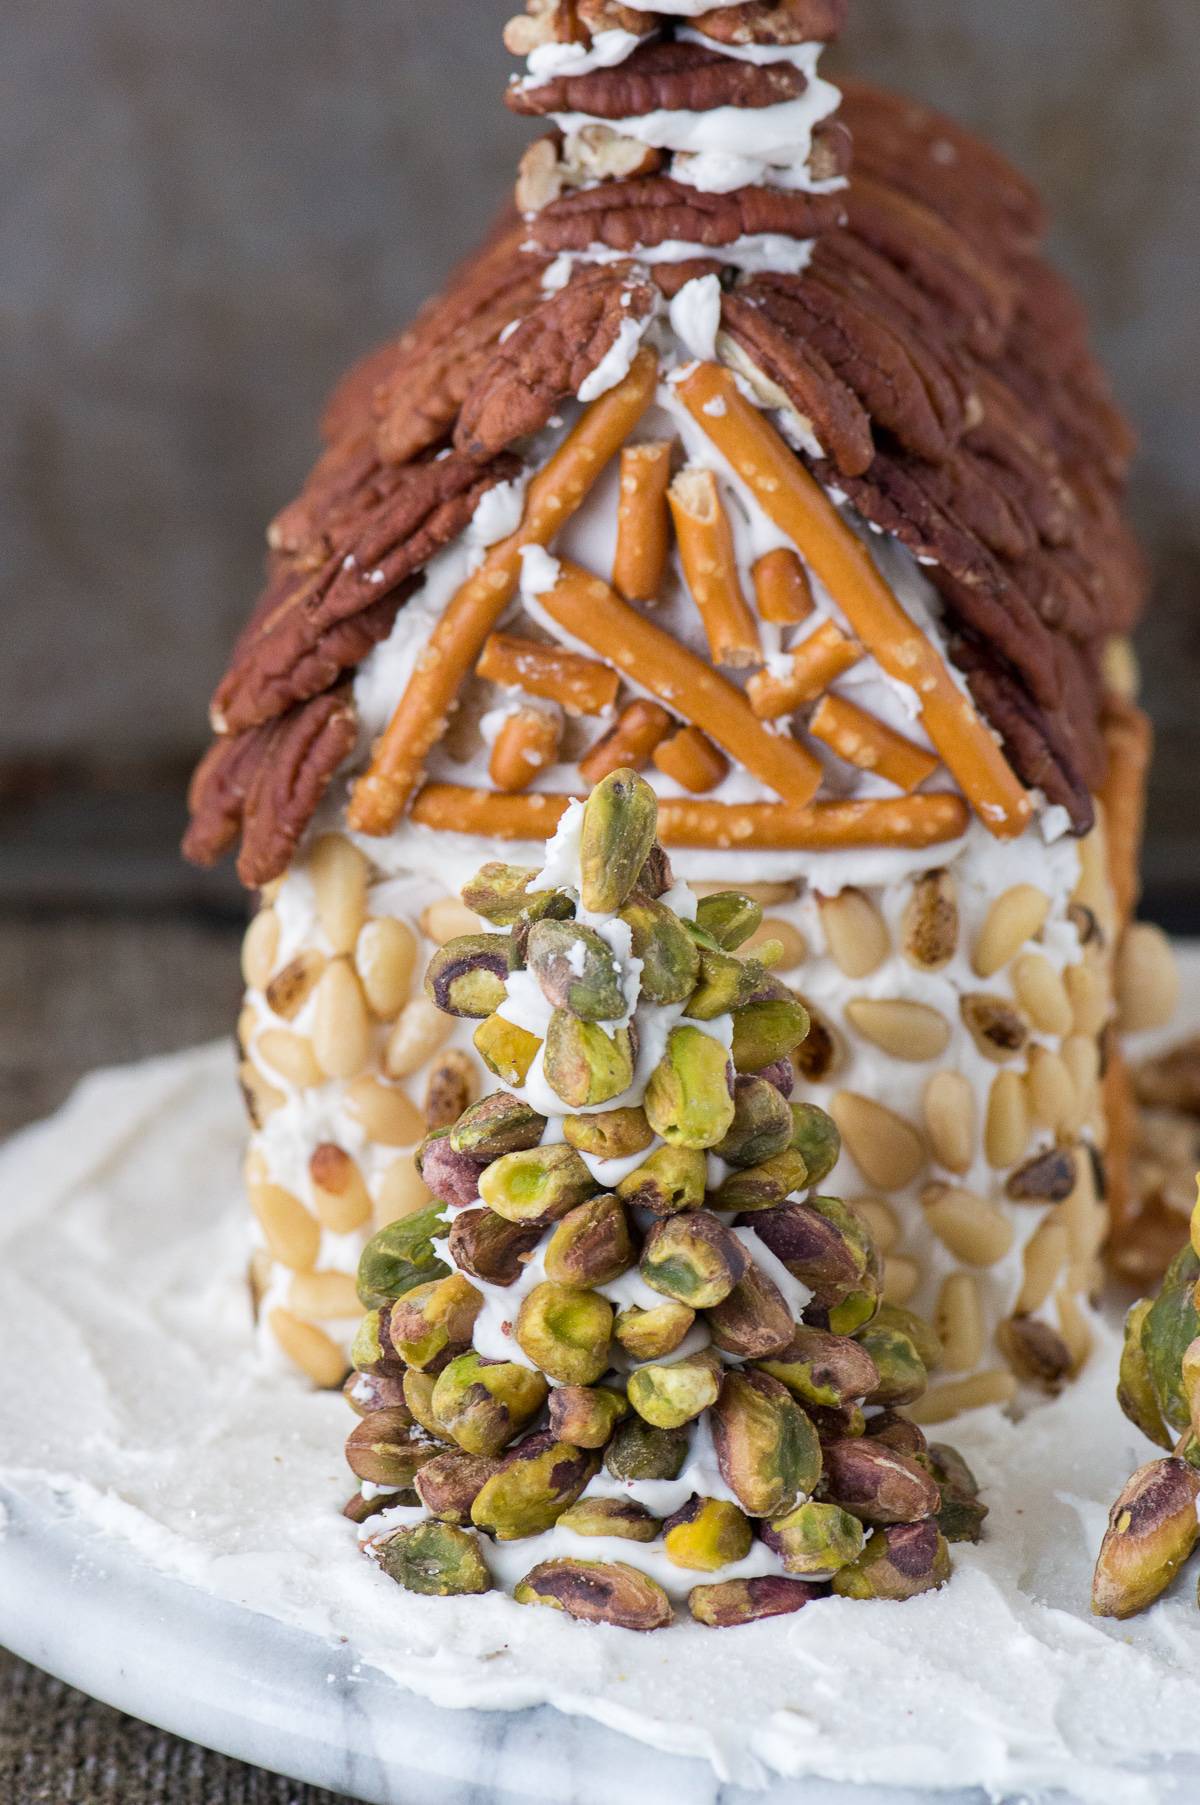 Nutty Gingerbread House | The First Year